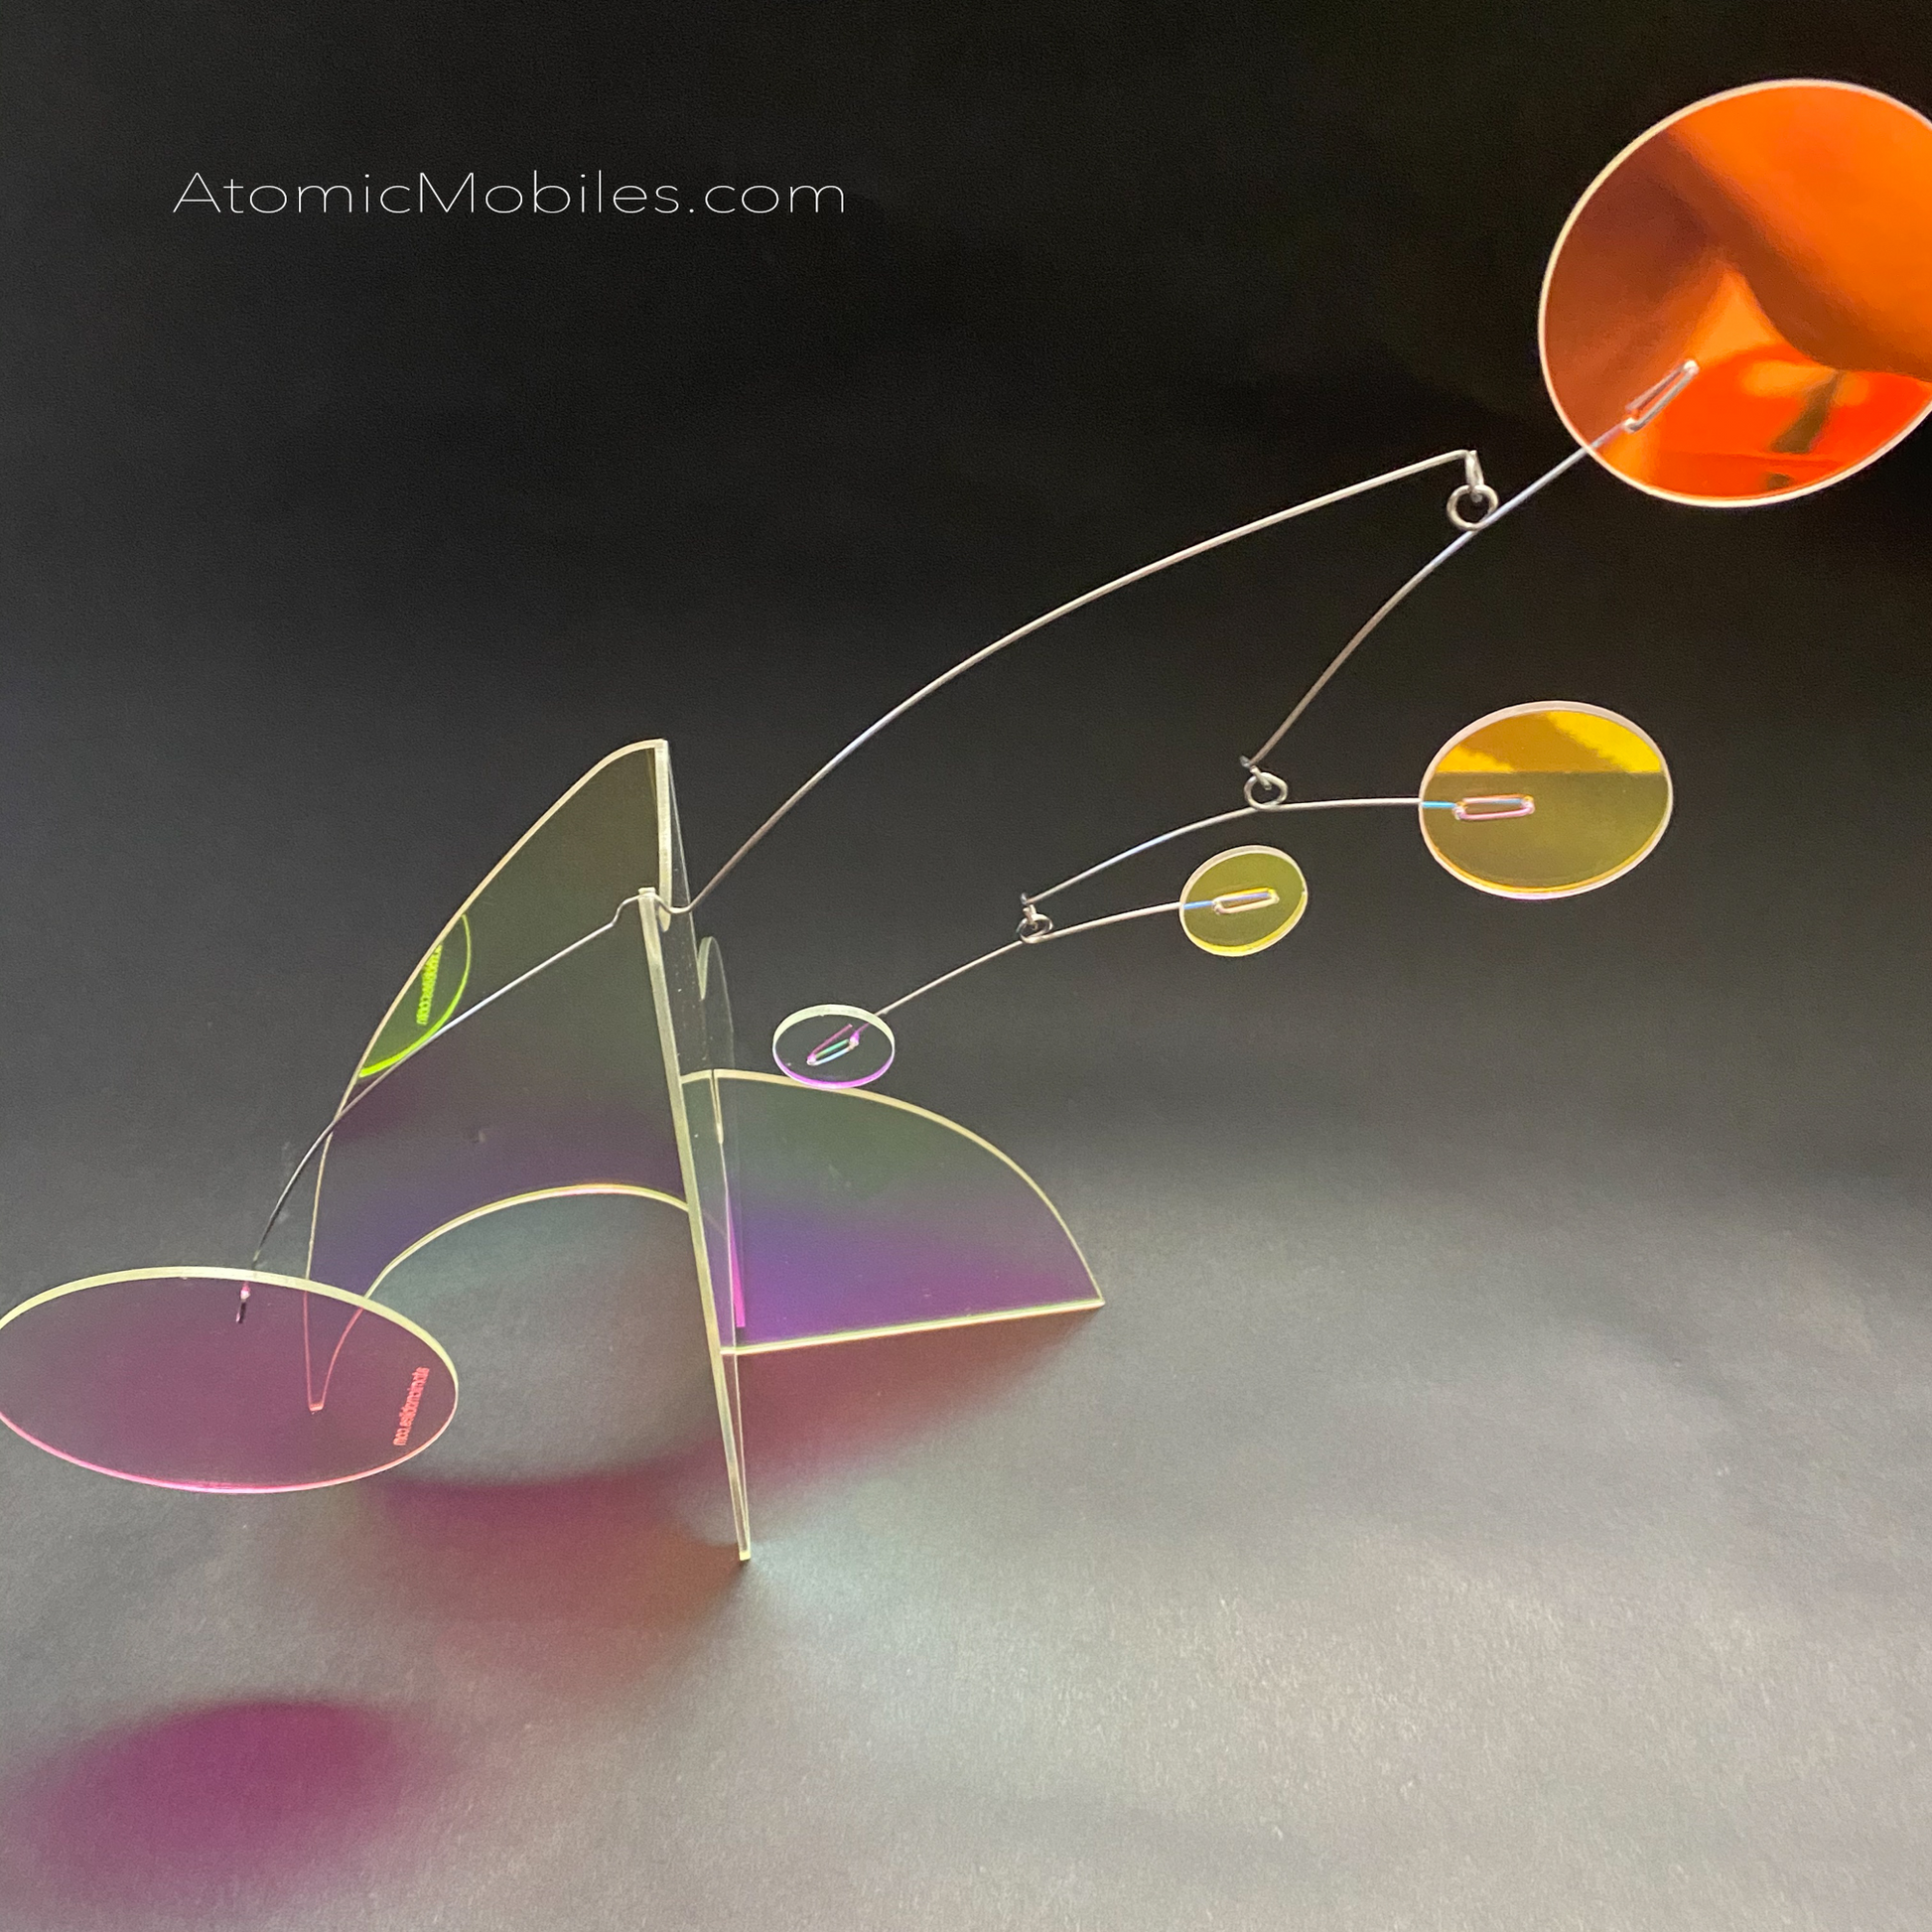 Fascinating prism iridescent modern art stabile sculpture by AtomicMobiles.com